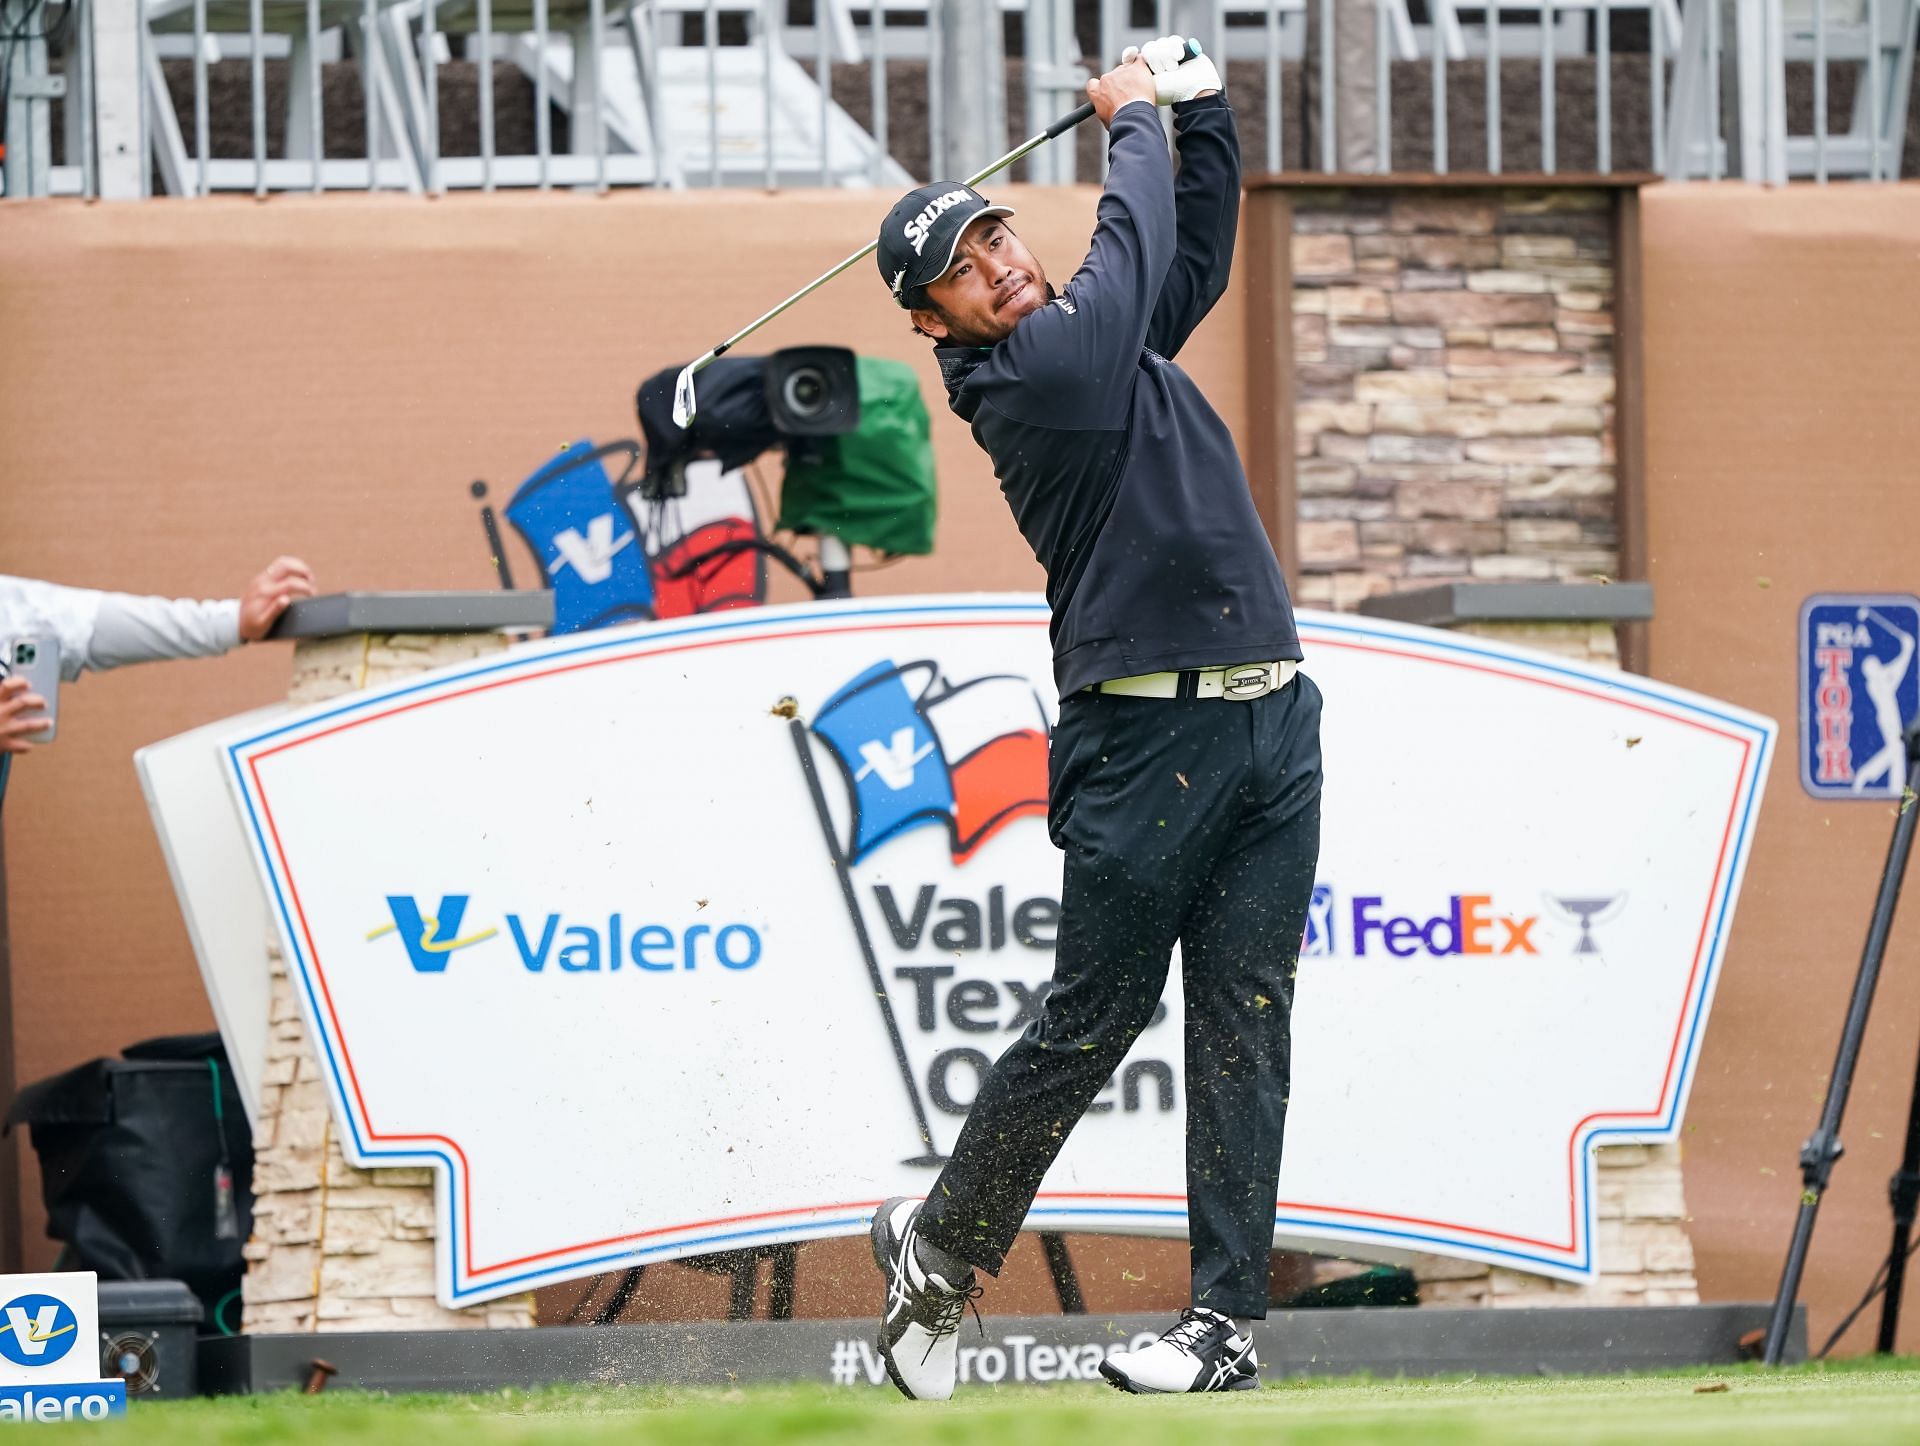 How much did golfers win at the Valero Texas Open? Prize money payouts